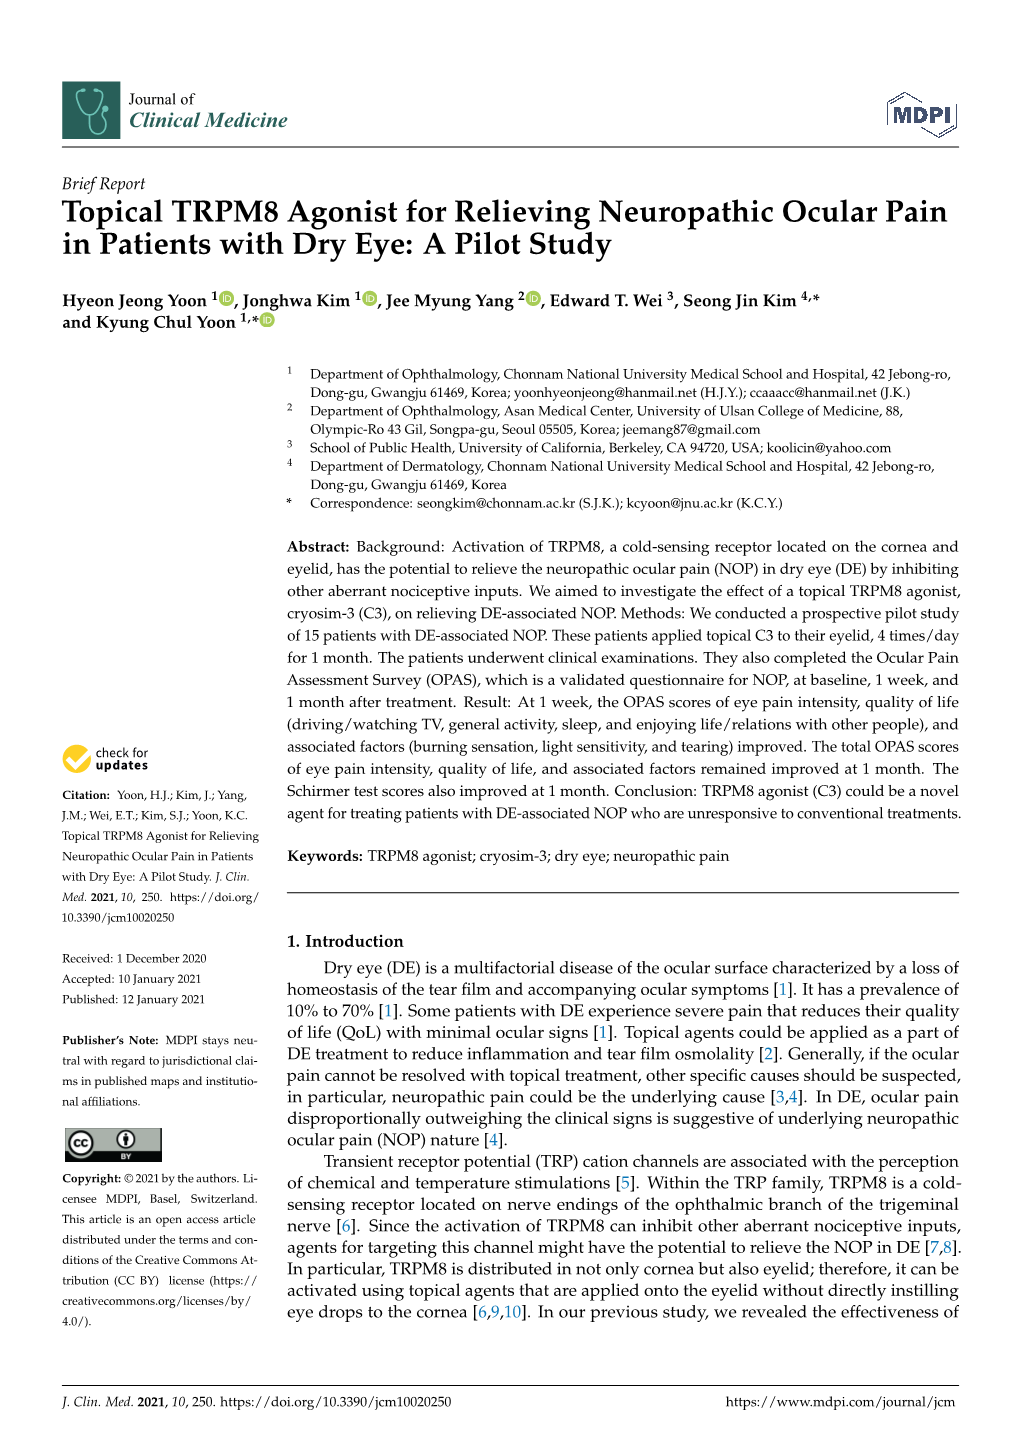 Topical TRPM8 Agonist for Relieving Neuropathic Ocular Pain in Patients with Dry Eye: a Pilot Study